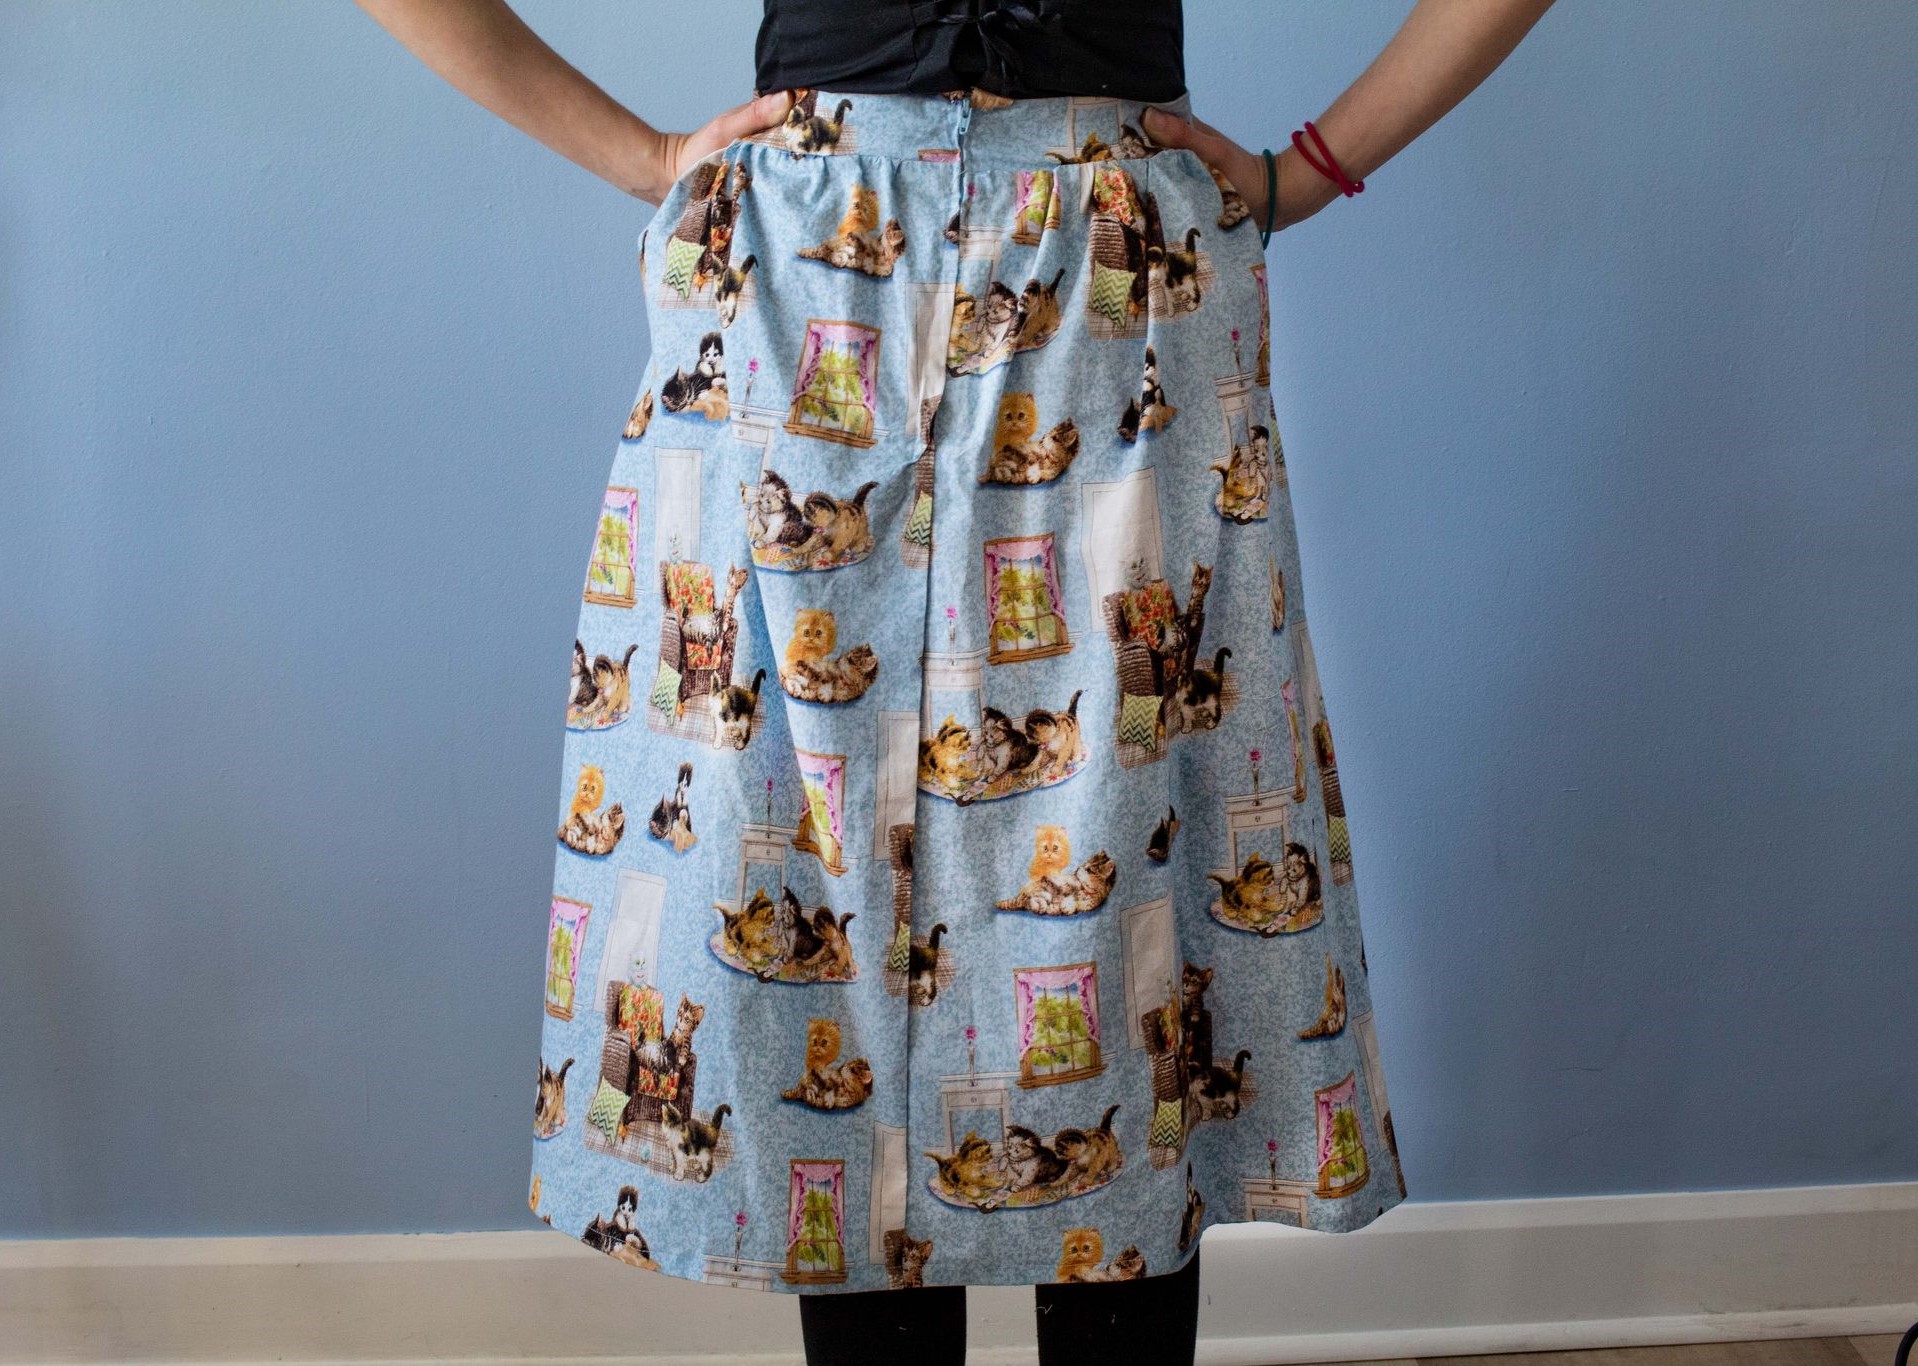 Zoomed in product image of Pixiebob skirt pattern, featuring four kittens playing on and around a  chair